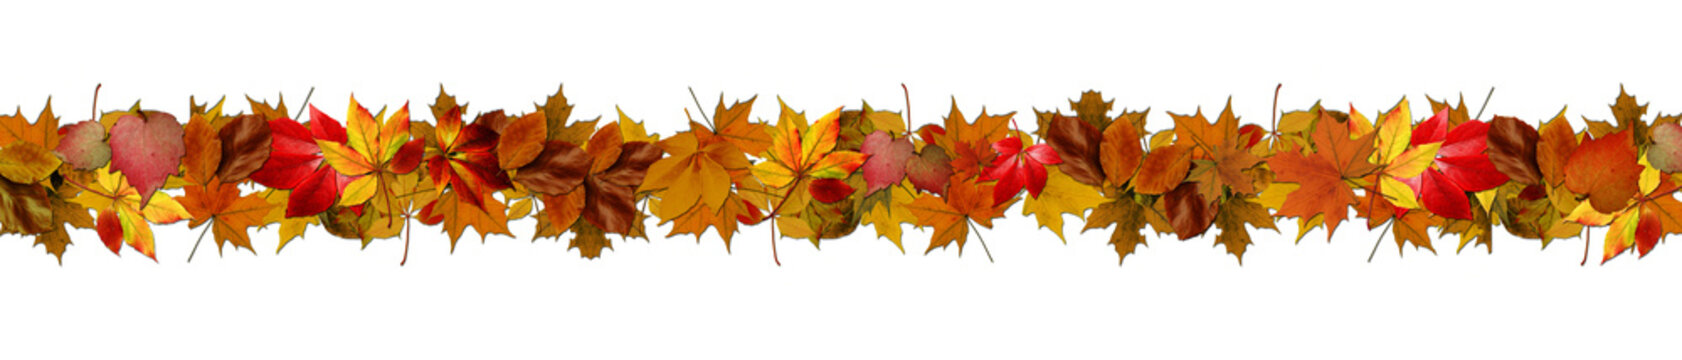 Autumn banner from colorful leaves on transparent background for websites and decor - 3D Illustration